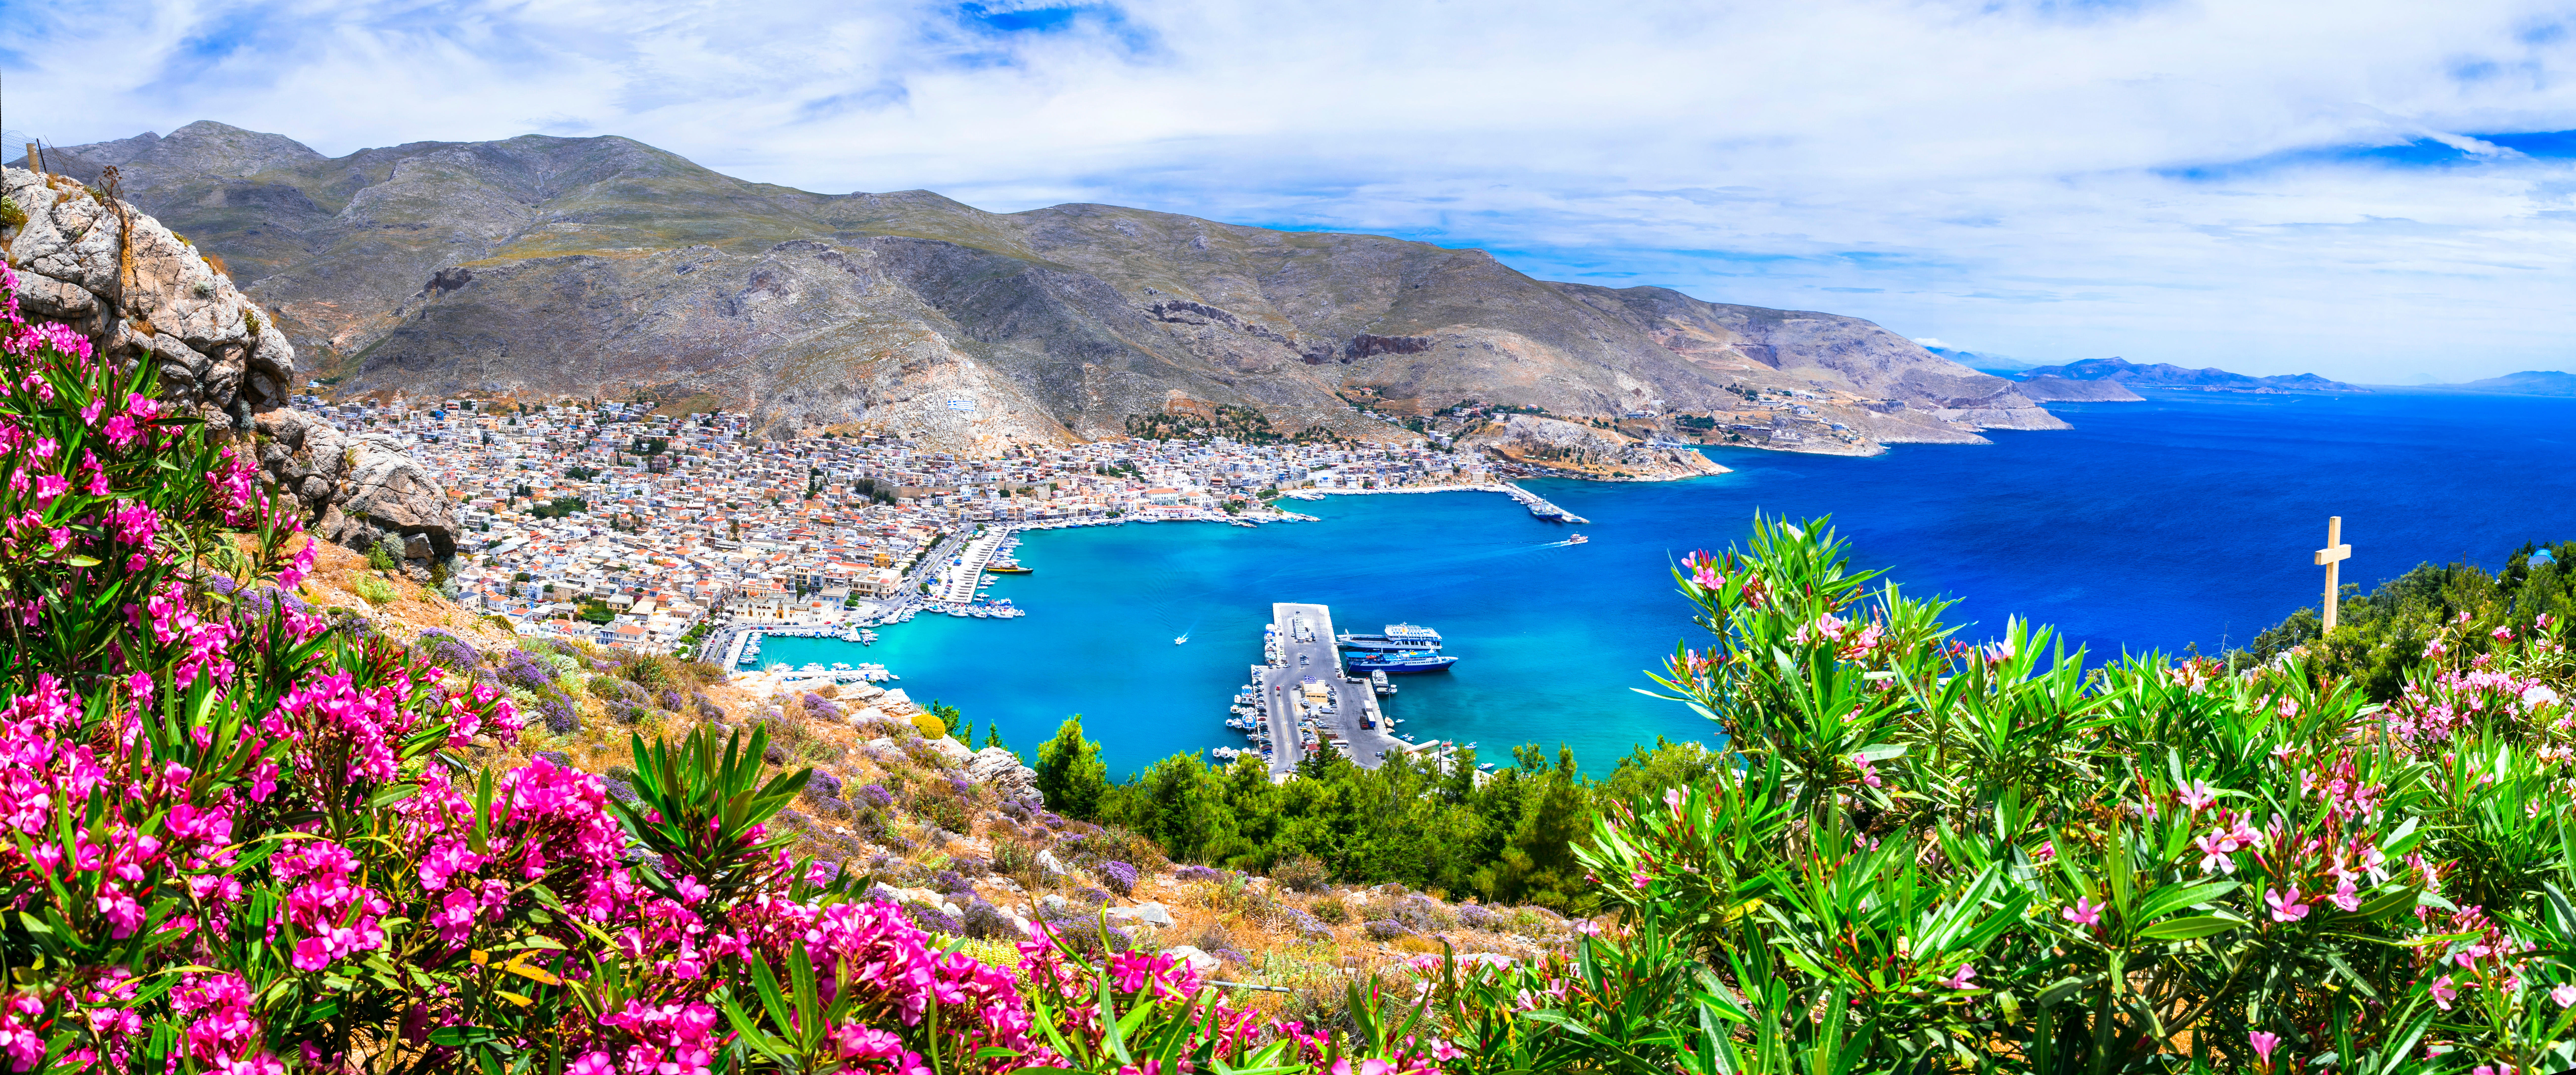 Kalymnos has the cheapest package holiday deals in Europe, according to Which?